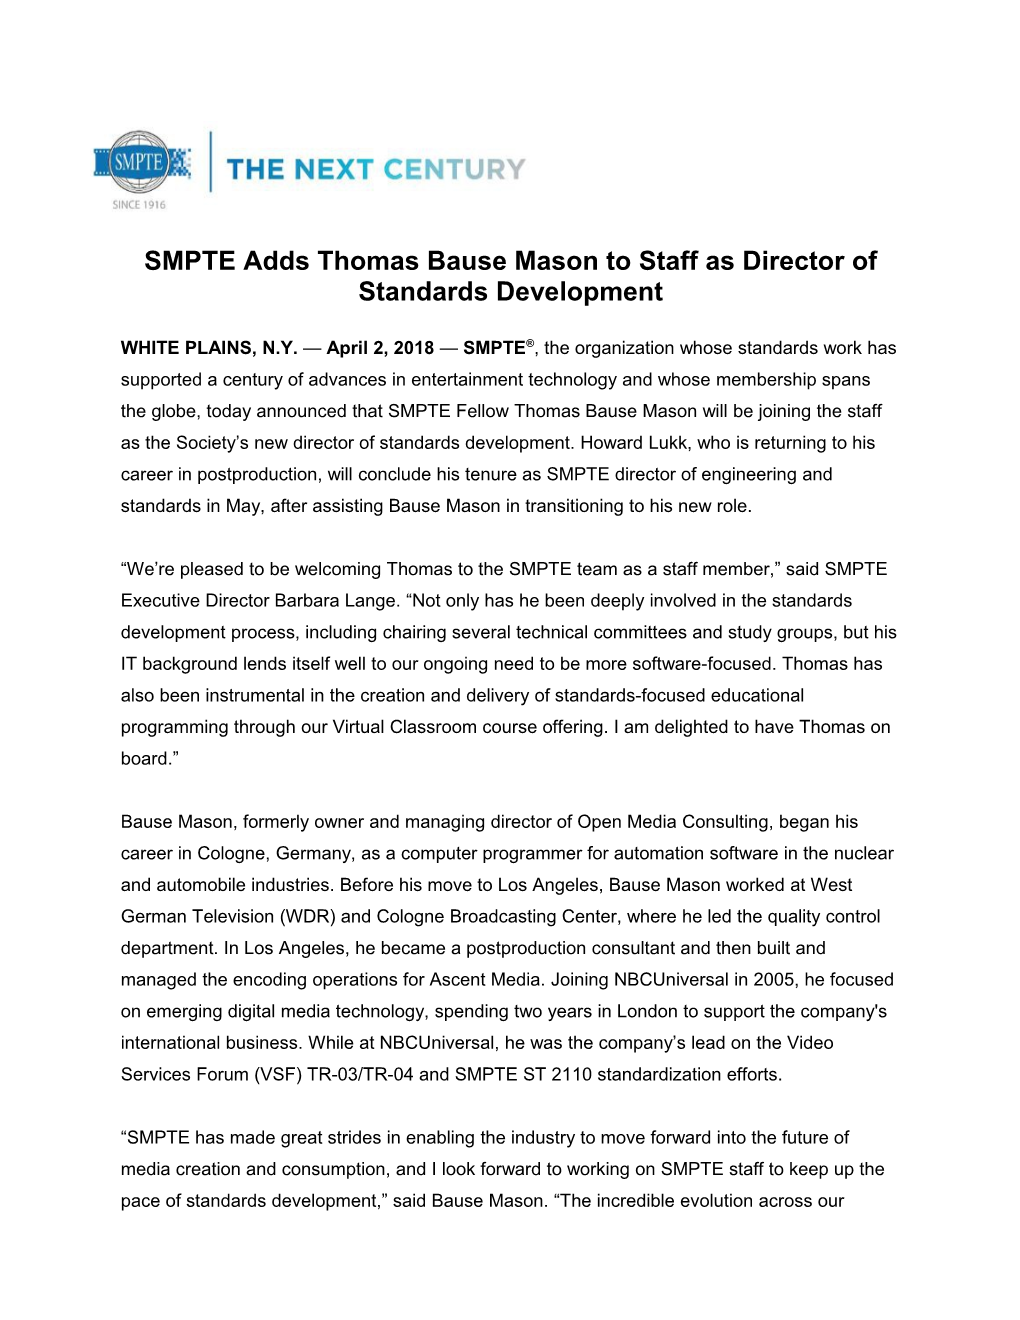 SMPTE Adds Thomas Bause Mason to Staff As Director of Standards Development